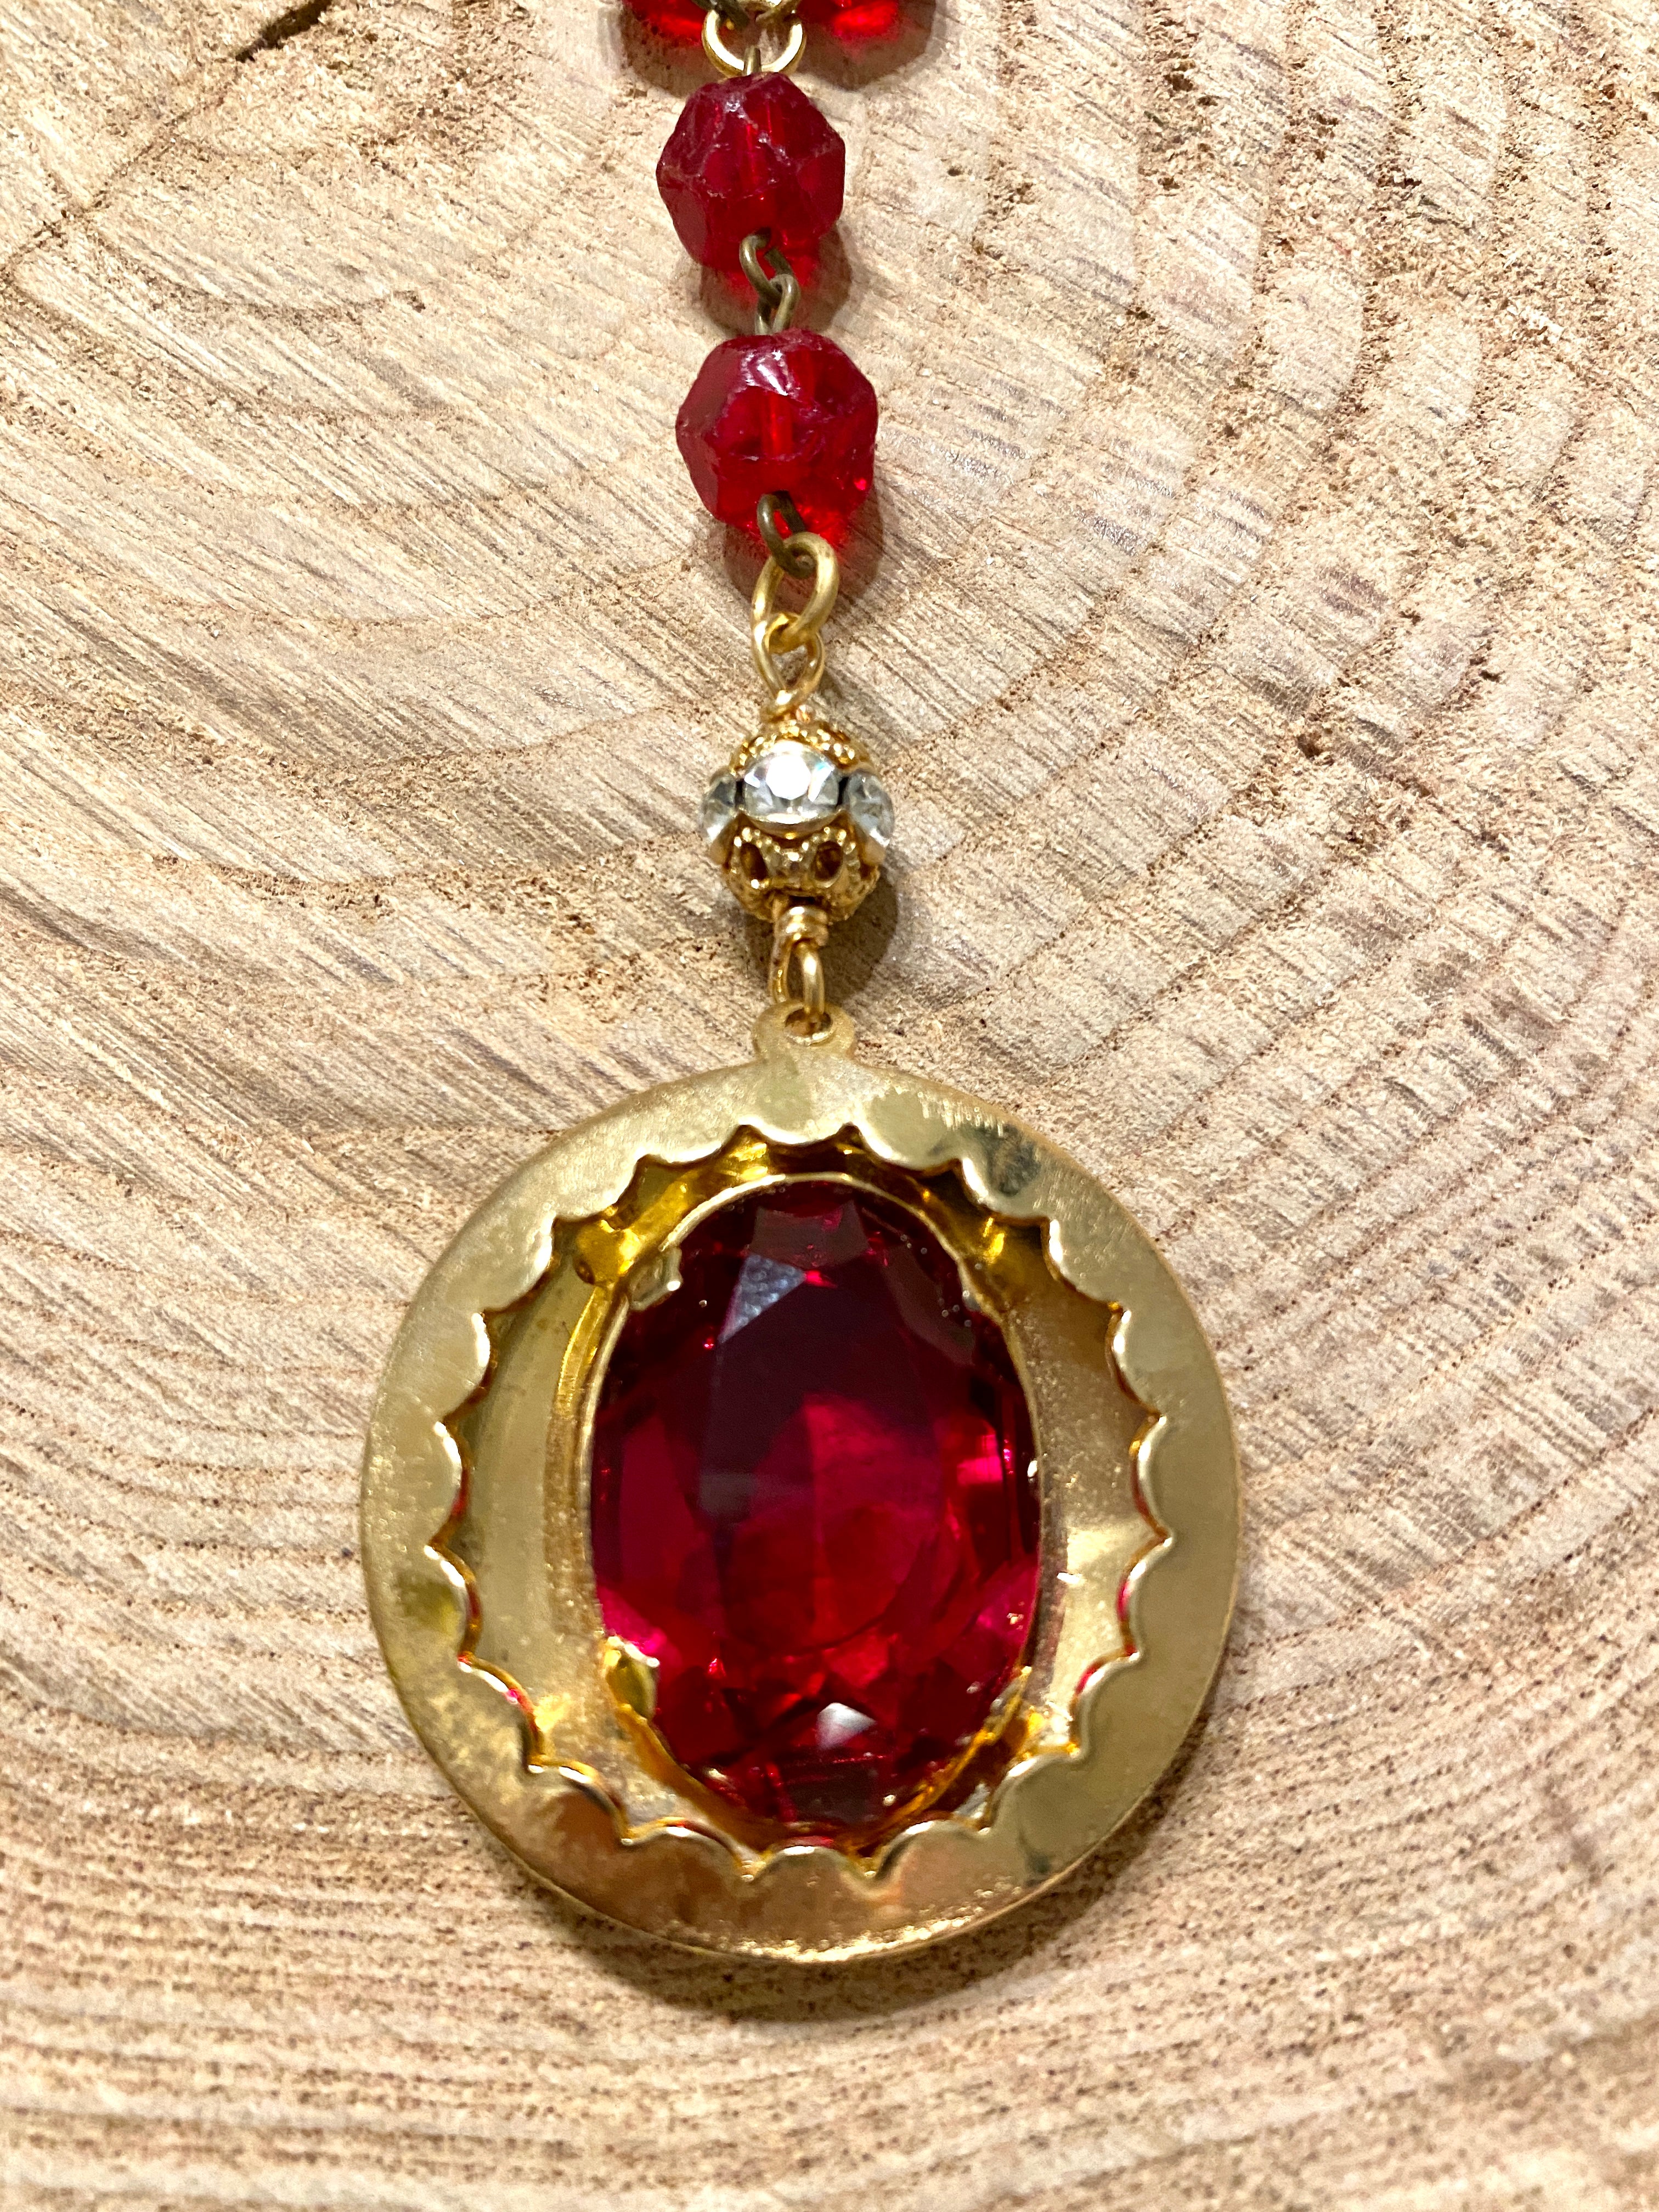 Red Eye Necklace